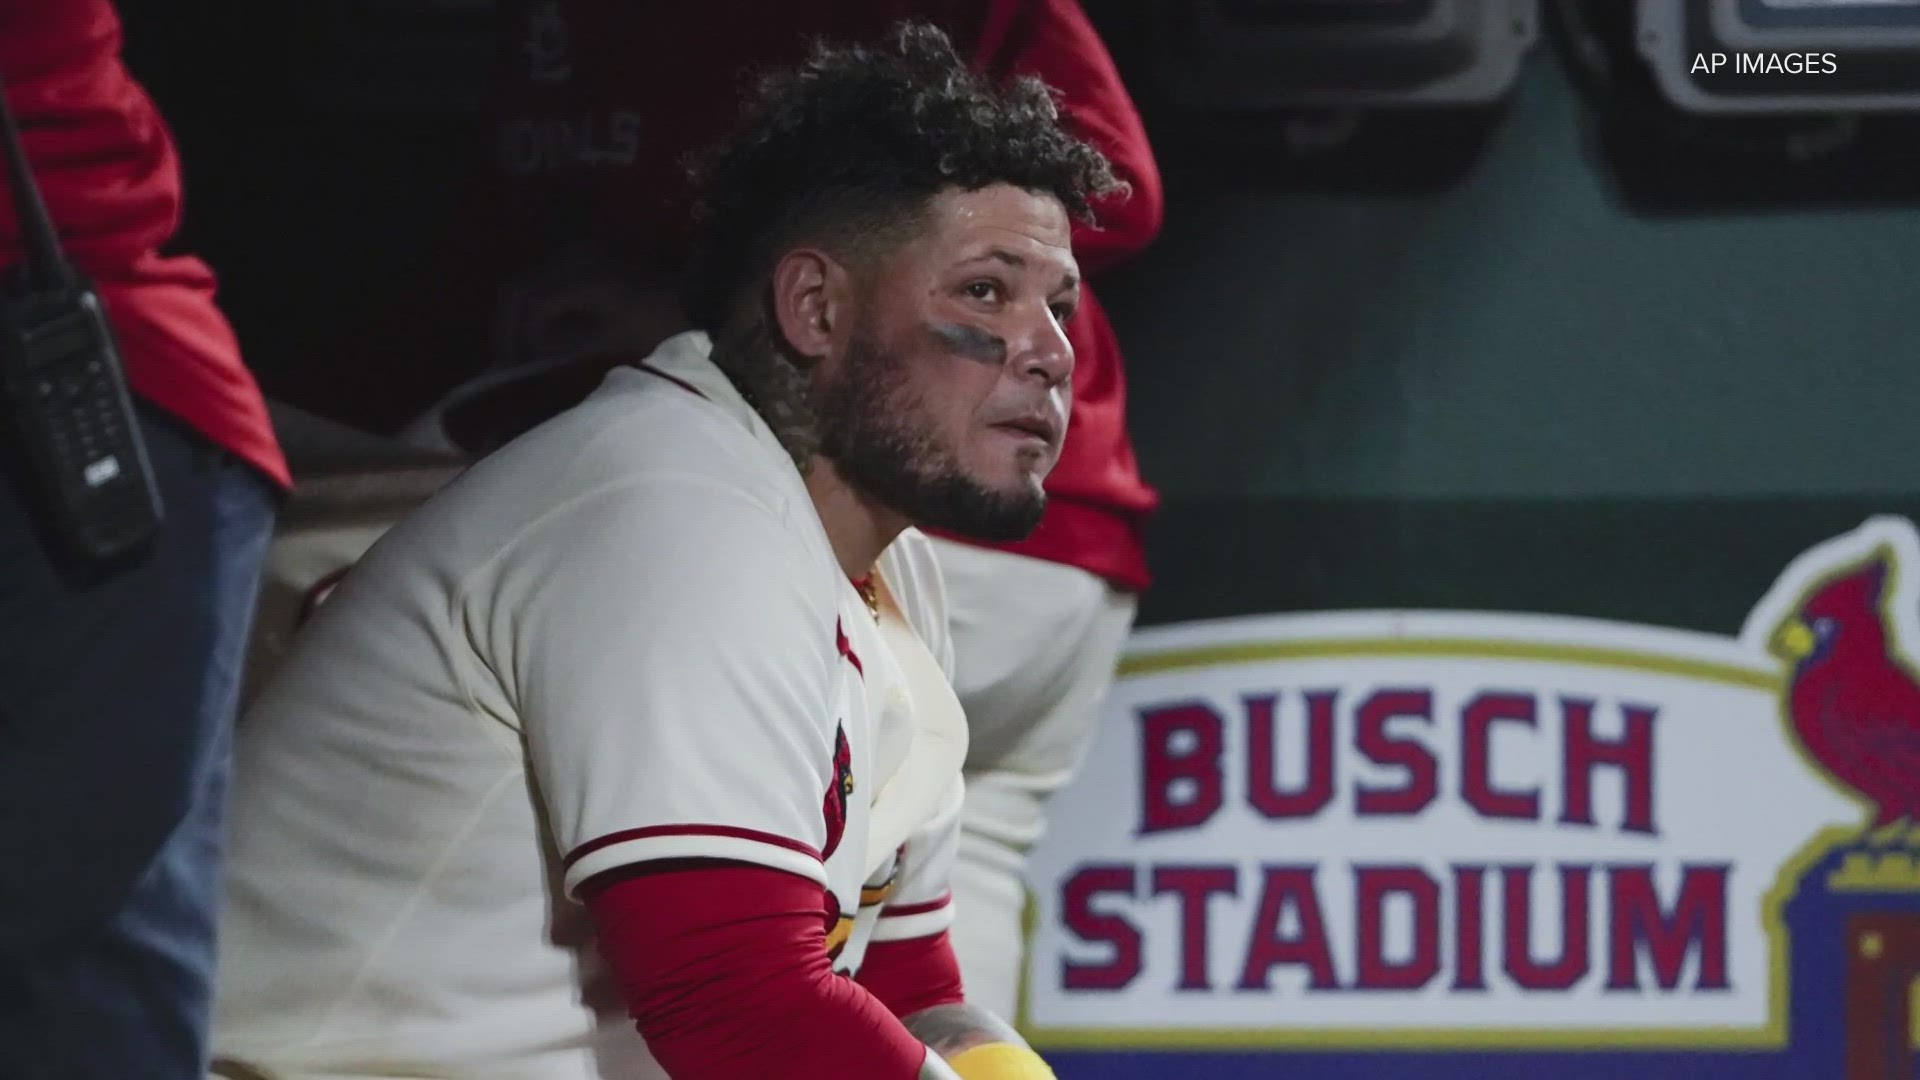 Will Yadier Molina return to the St. Louis Cardinals on the coaching staff? Here's what Bengie Molina said.